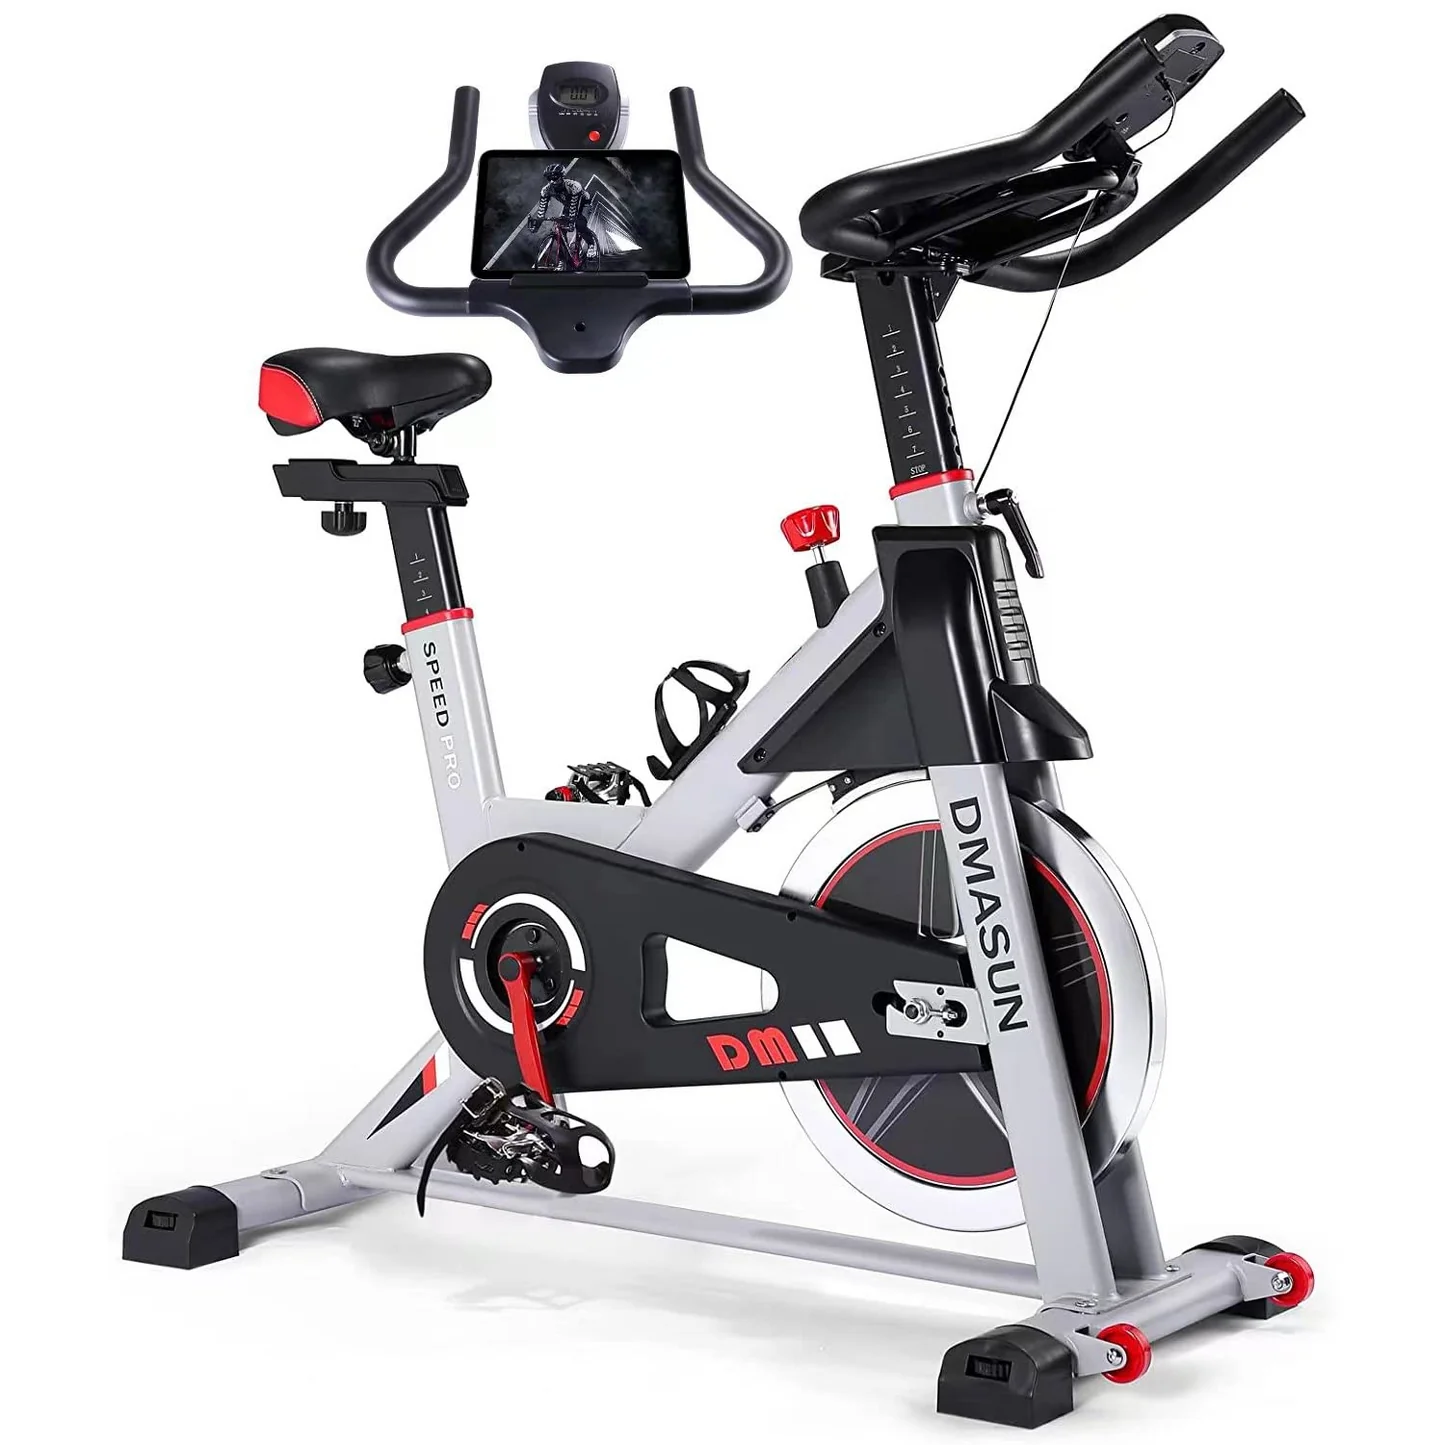 DMASUN Exercise Bike Review: Your Ultimate Fitness Partner